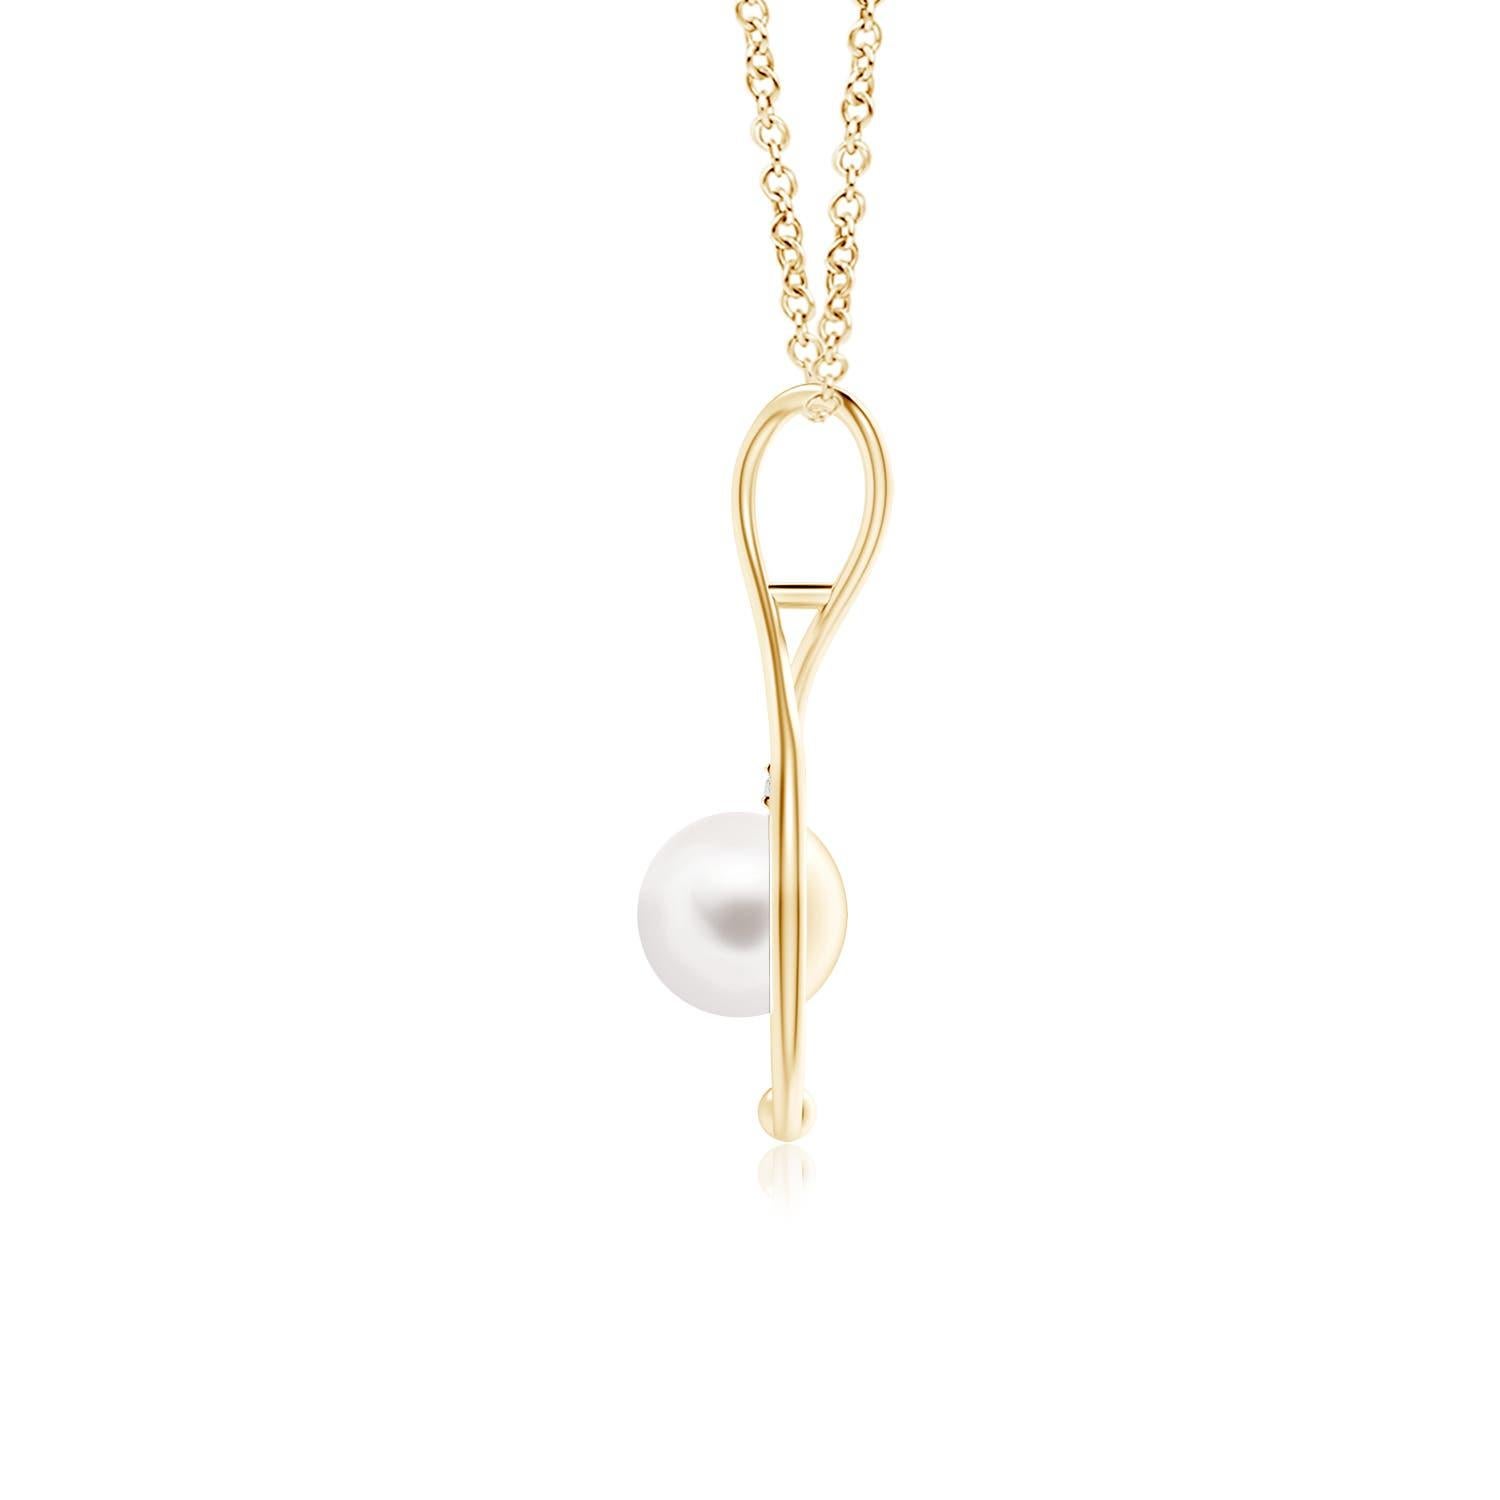 A modern classic, this pearl infinity necklace in 14K yellow gold is a beautiful interpretation of the popular infinity symbol. The infinity loop softly cuddles the round Freshwater cultured pearl to evoke a feeling of tenderness. The glimmering